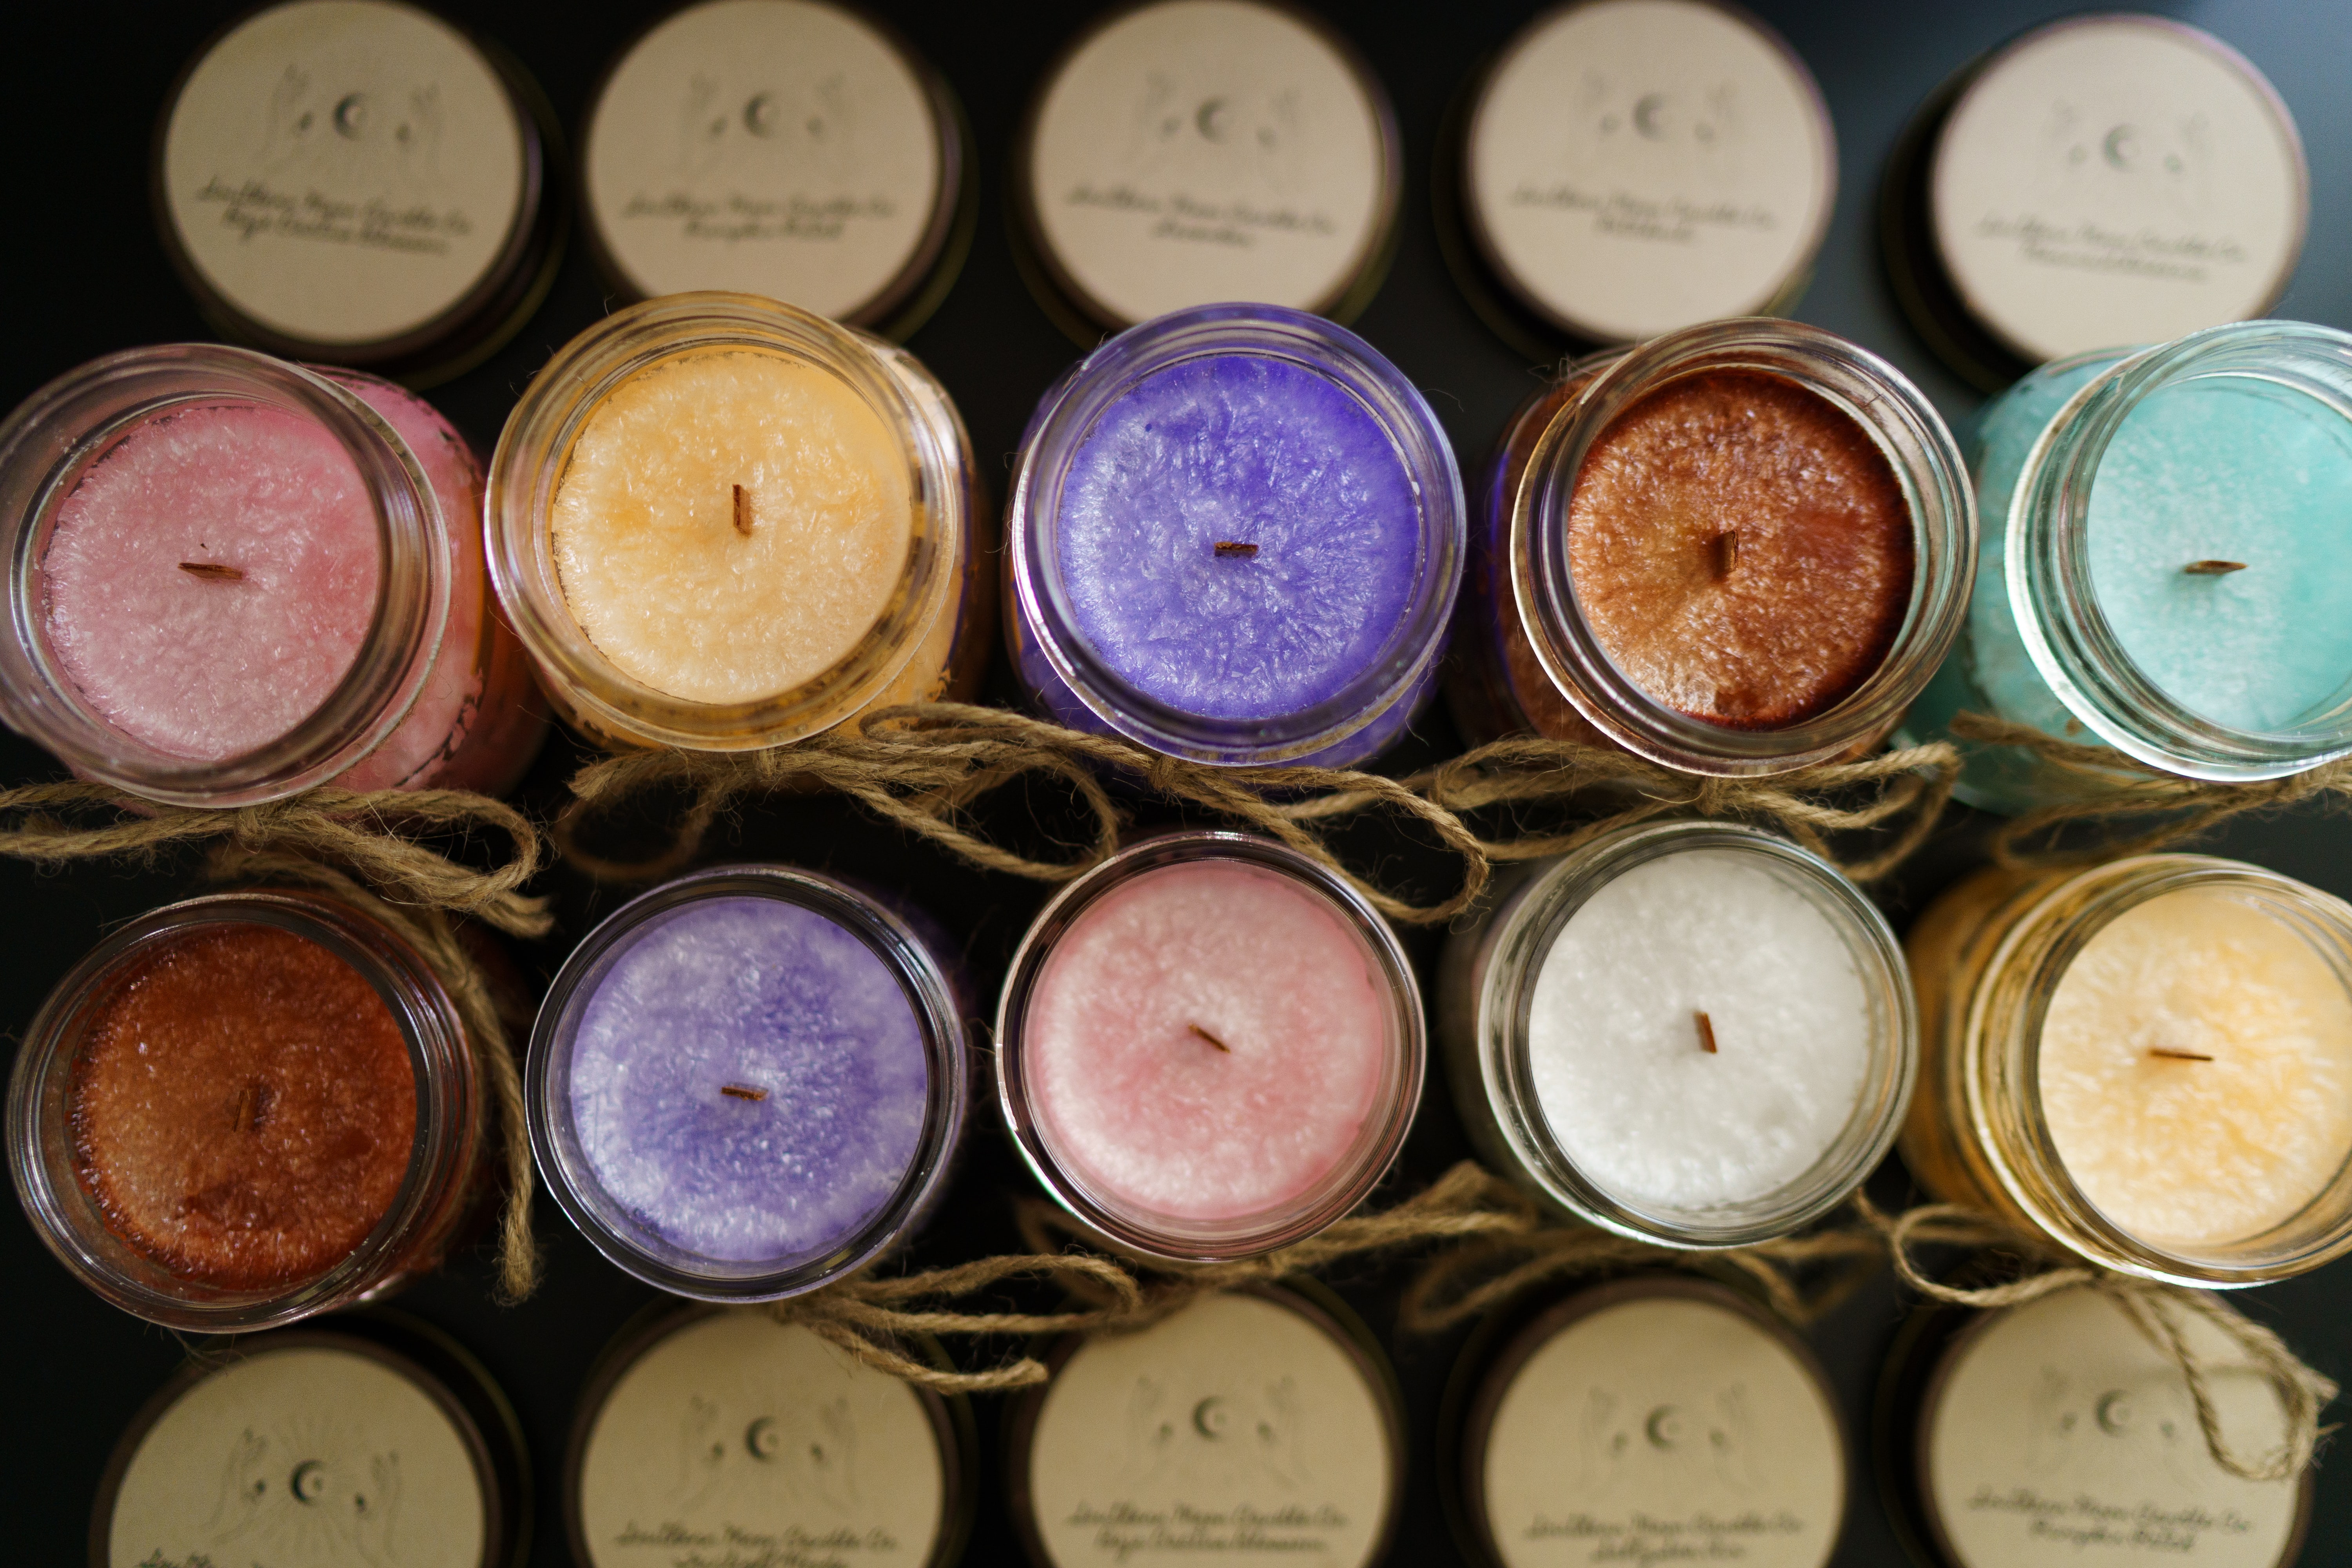 Shop for Aromatic Candles at These Cambridge Shops